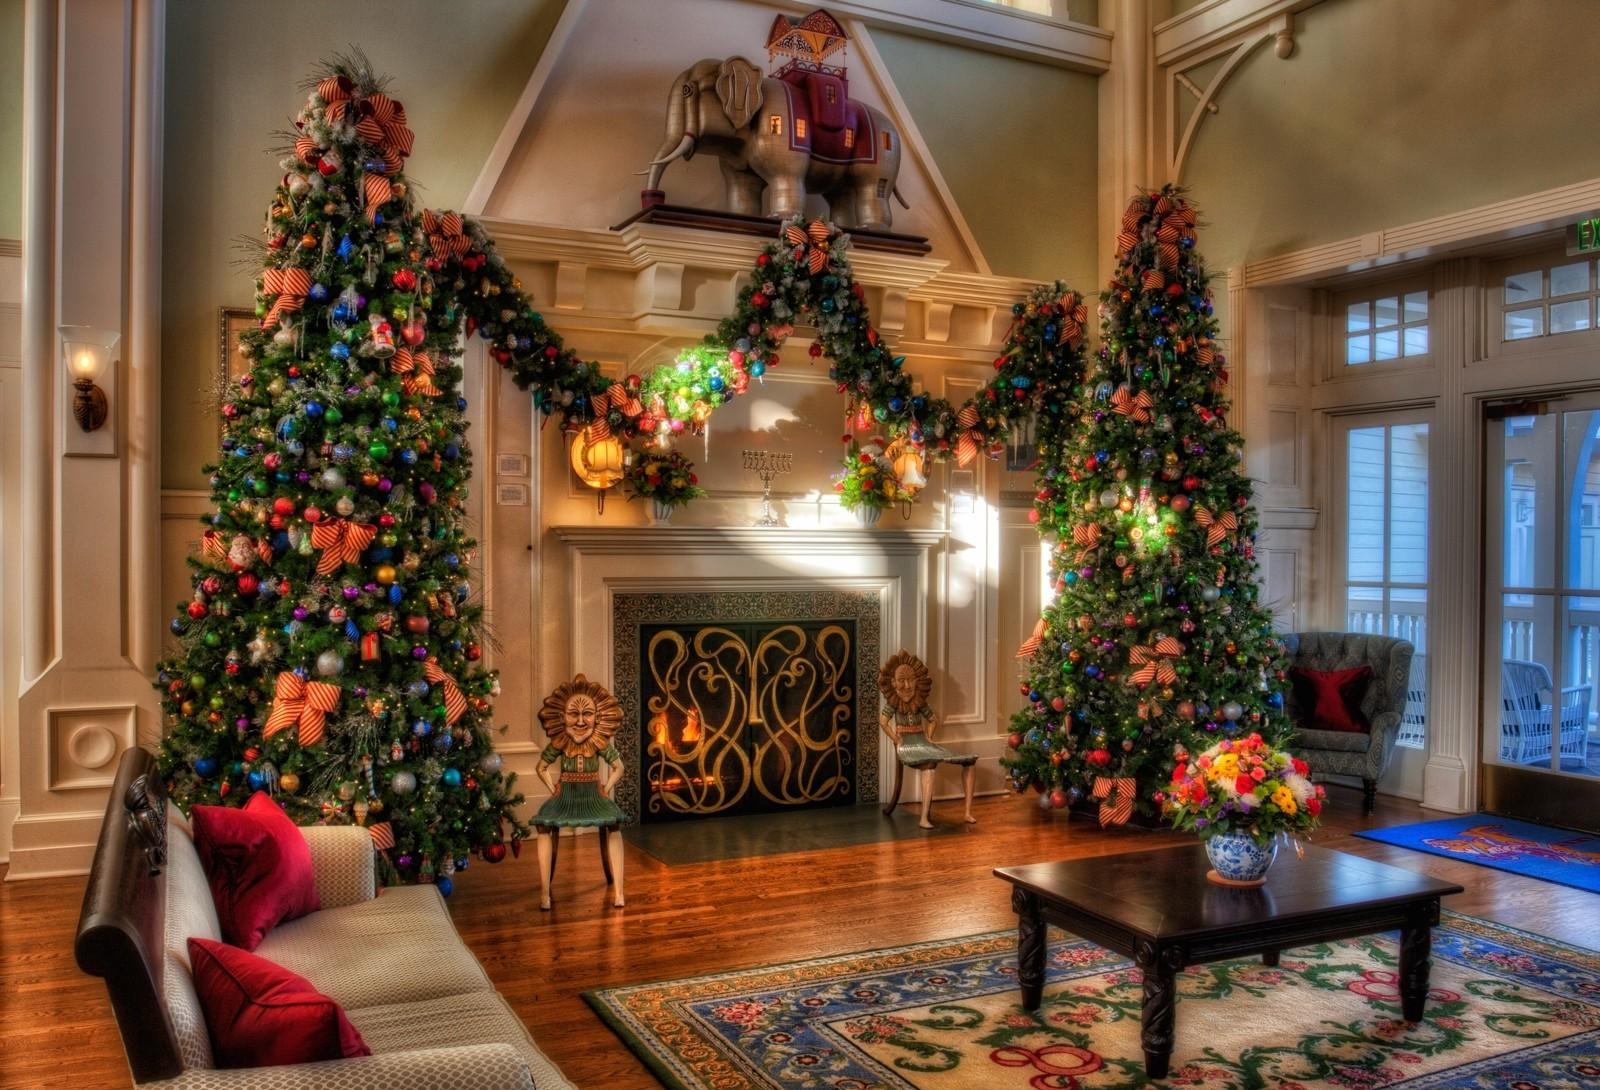 holidays, coziness, decorations, interior, holiday, house, comfort, fireplace, christmas trees Full HD